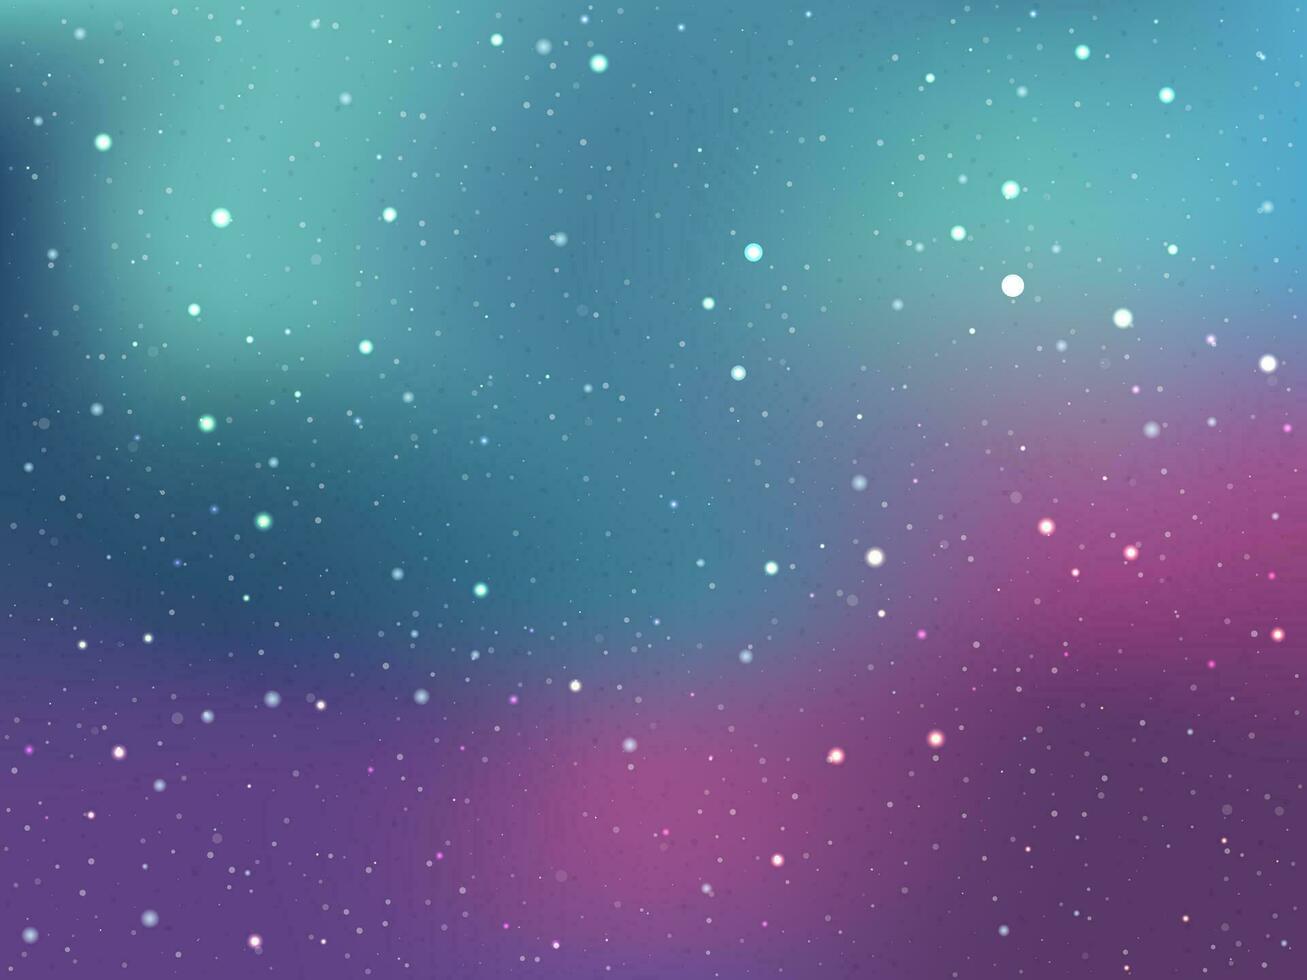 colorful galaxy background with stars and clouds vector